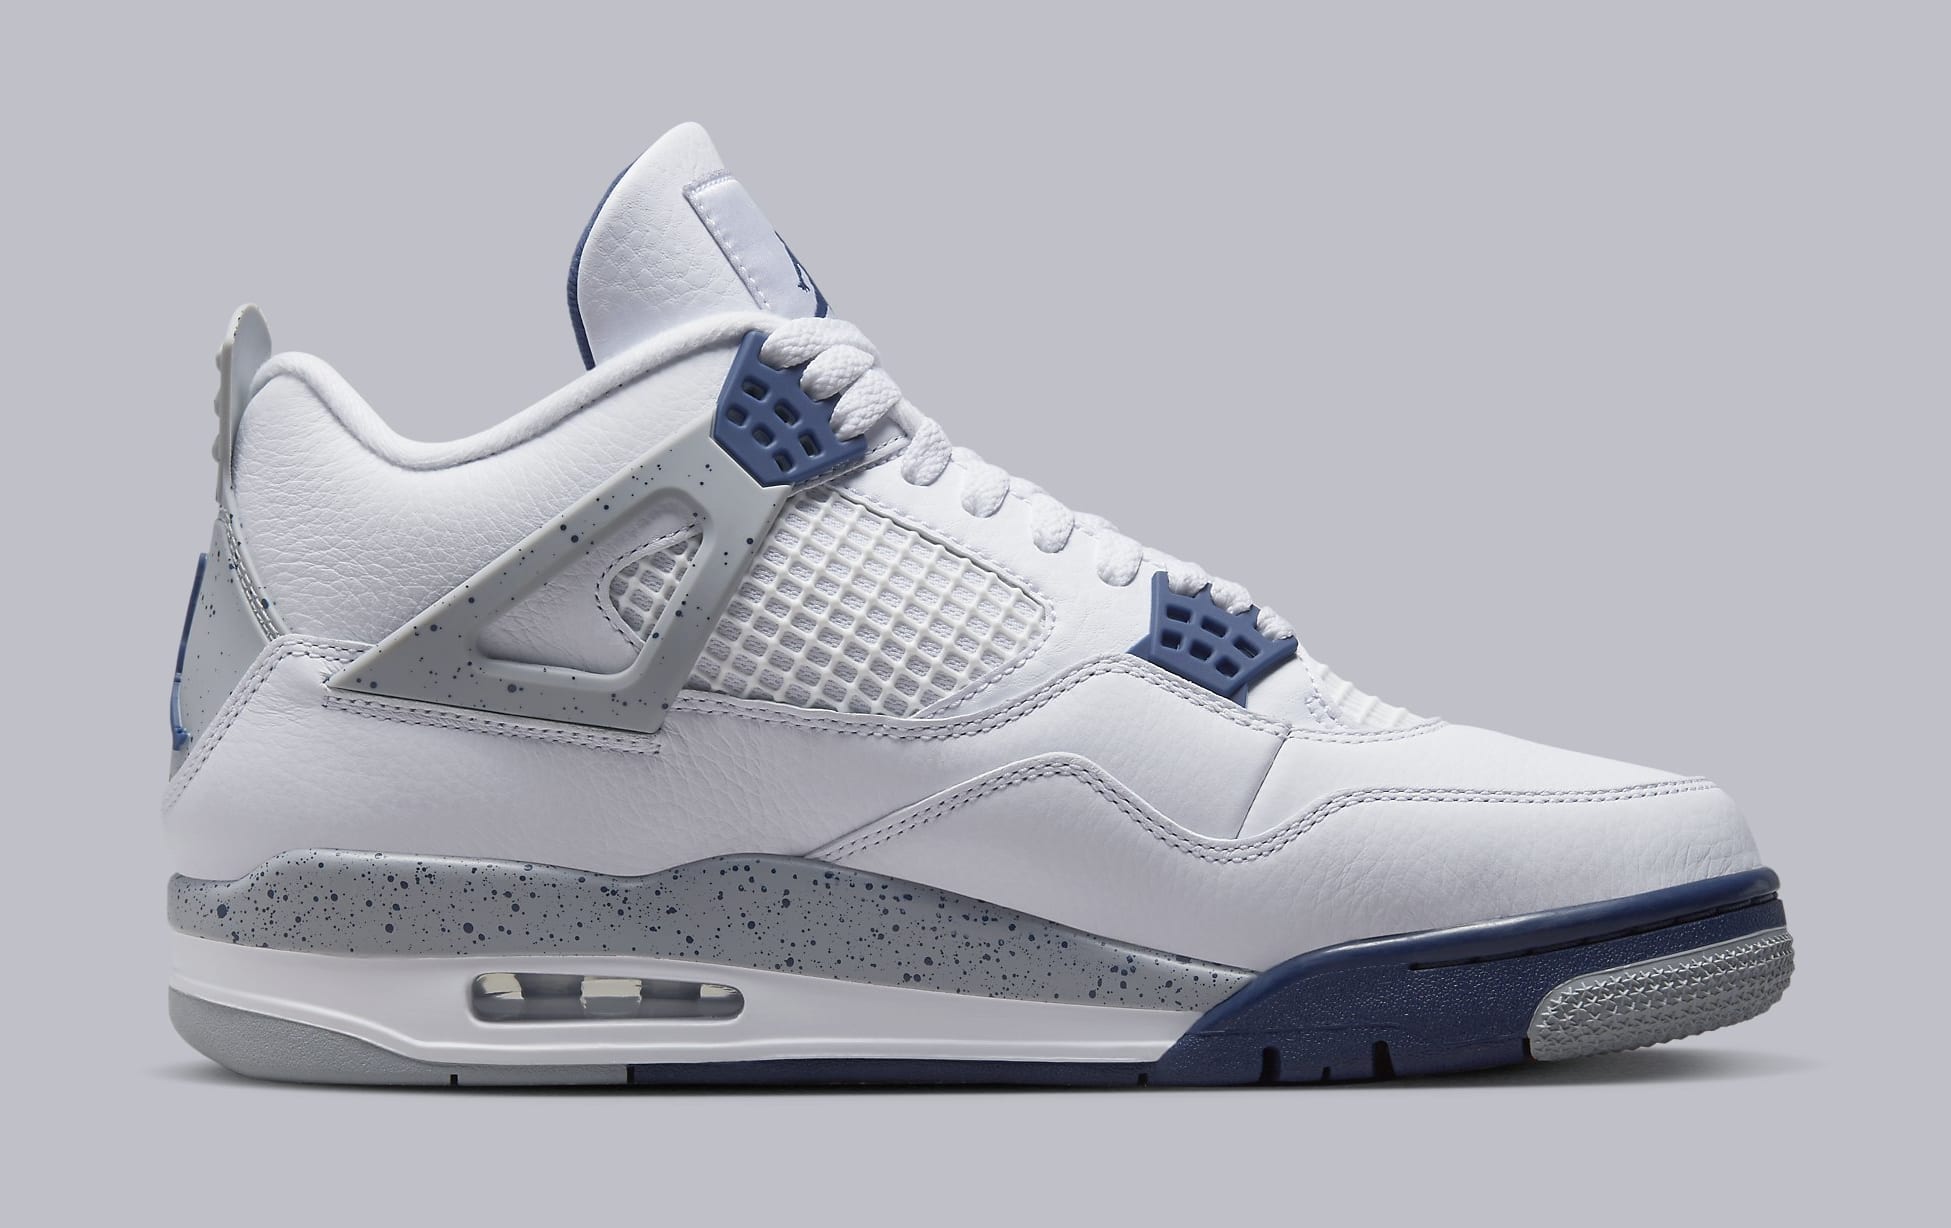 Air Jordan 4 IV Midnight Navy Release Date DH6927-140 | Sole Collector